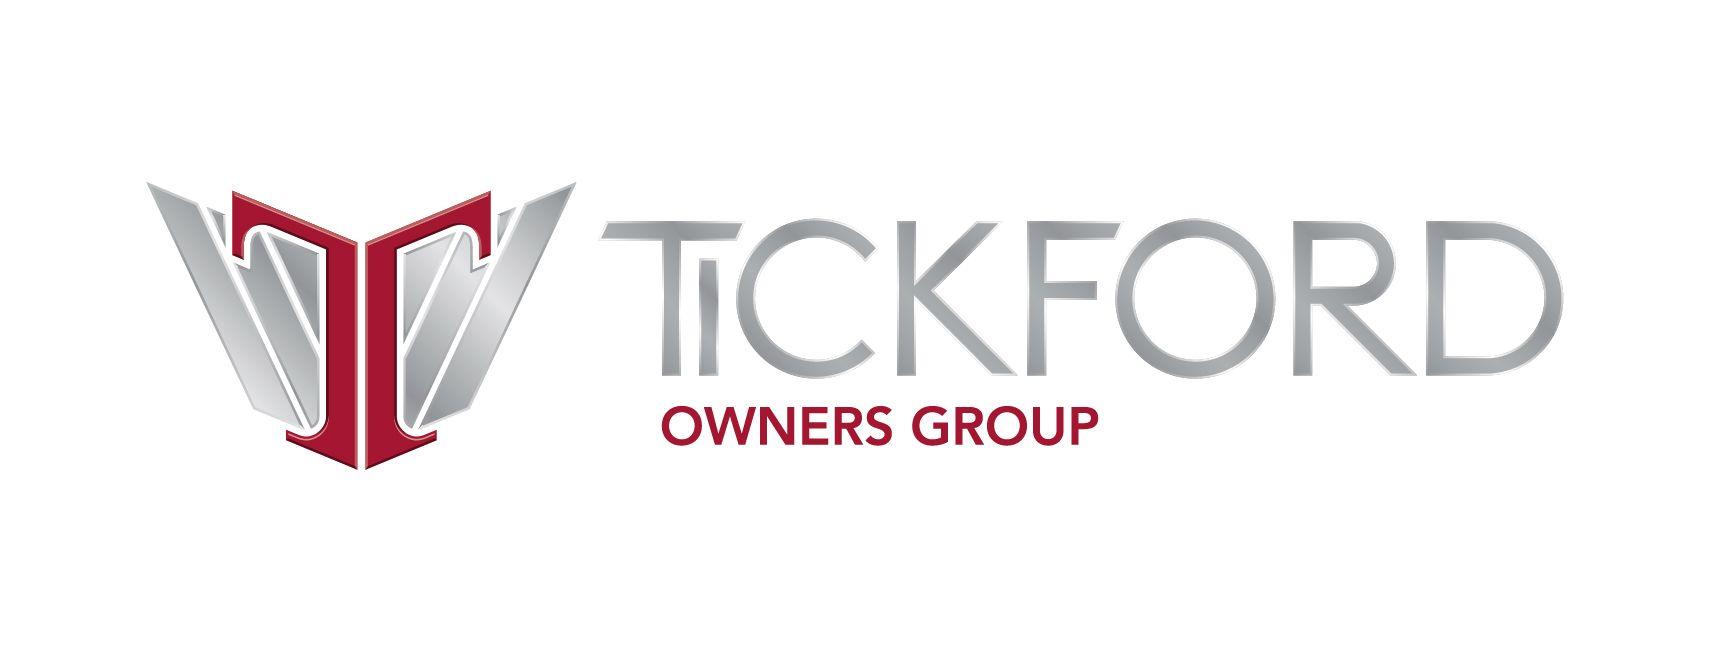 Tickford Logo - tickford-owners-group-social-media-cover-pic-landscape-b_proof ...